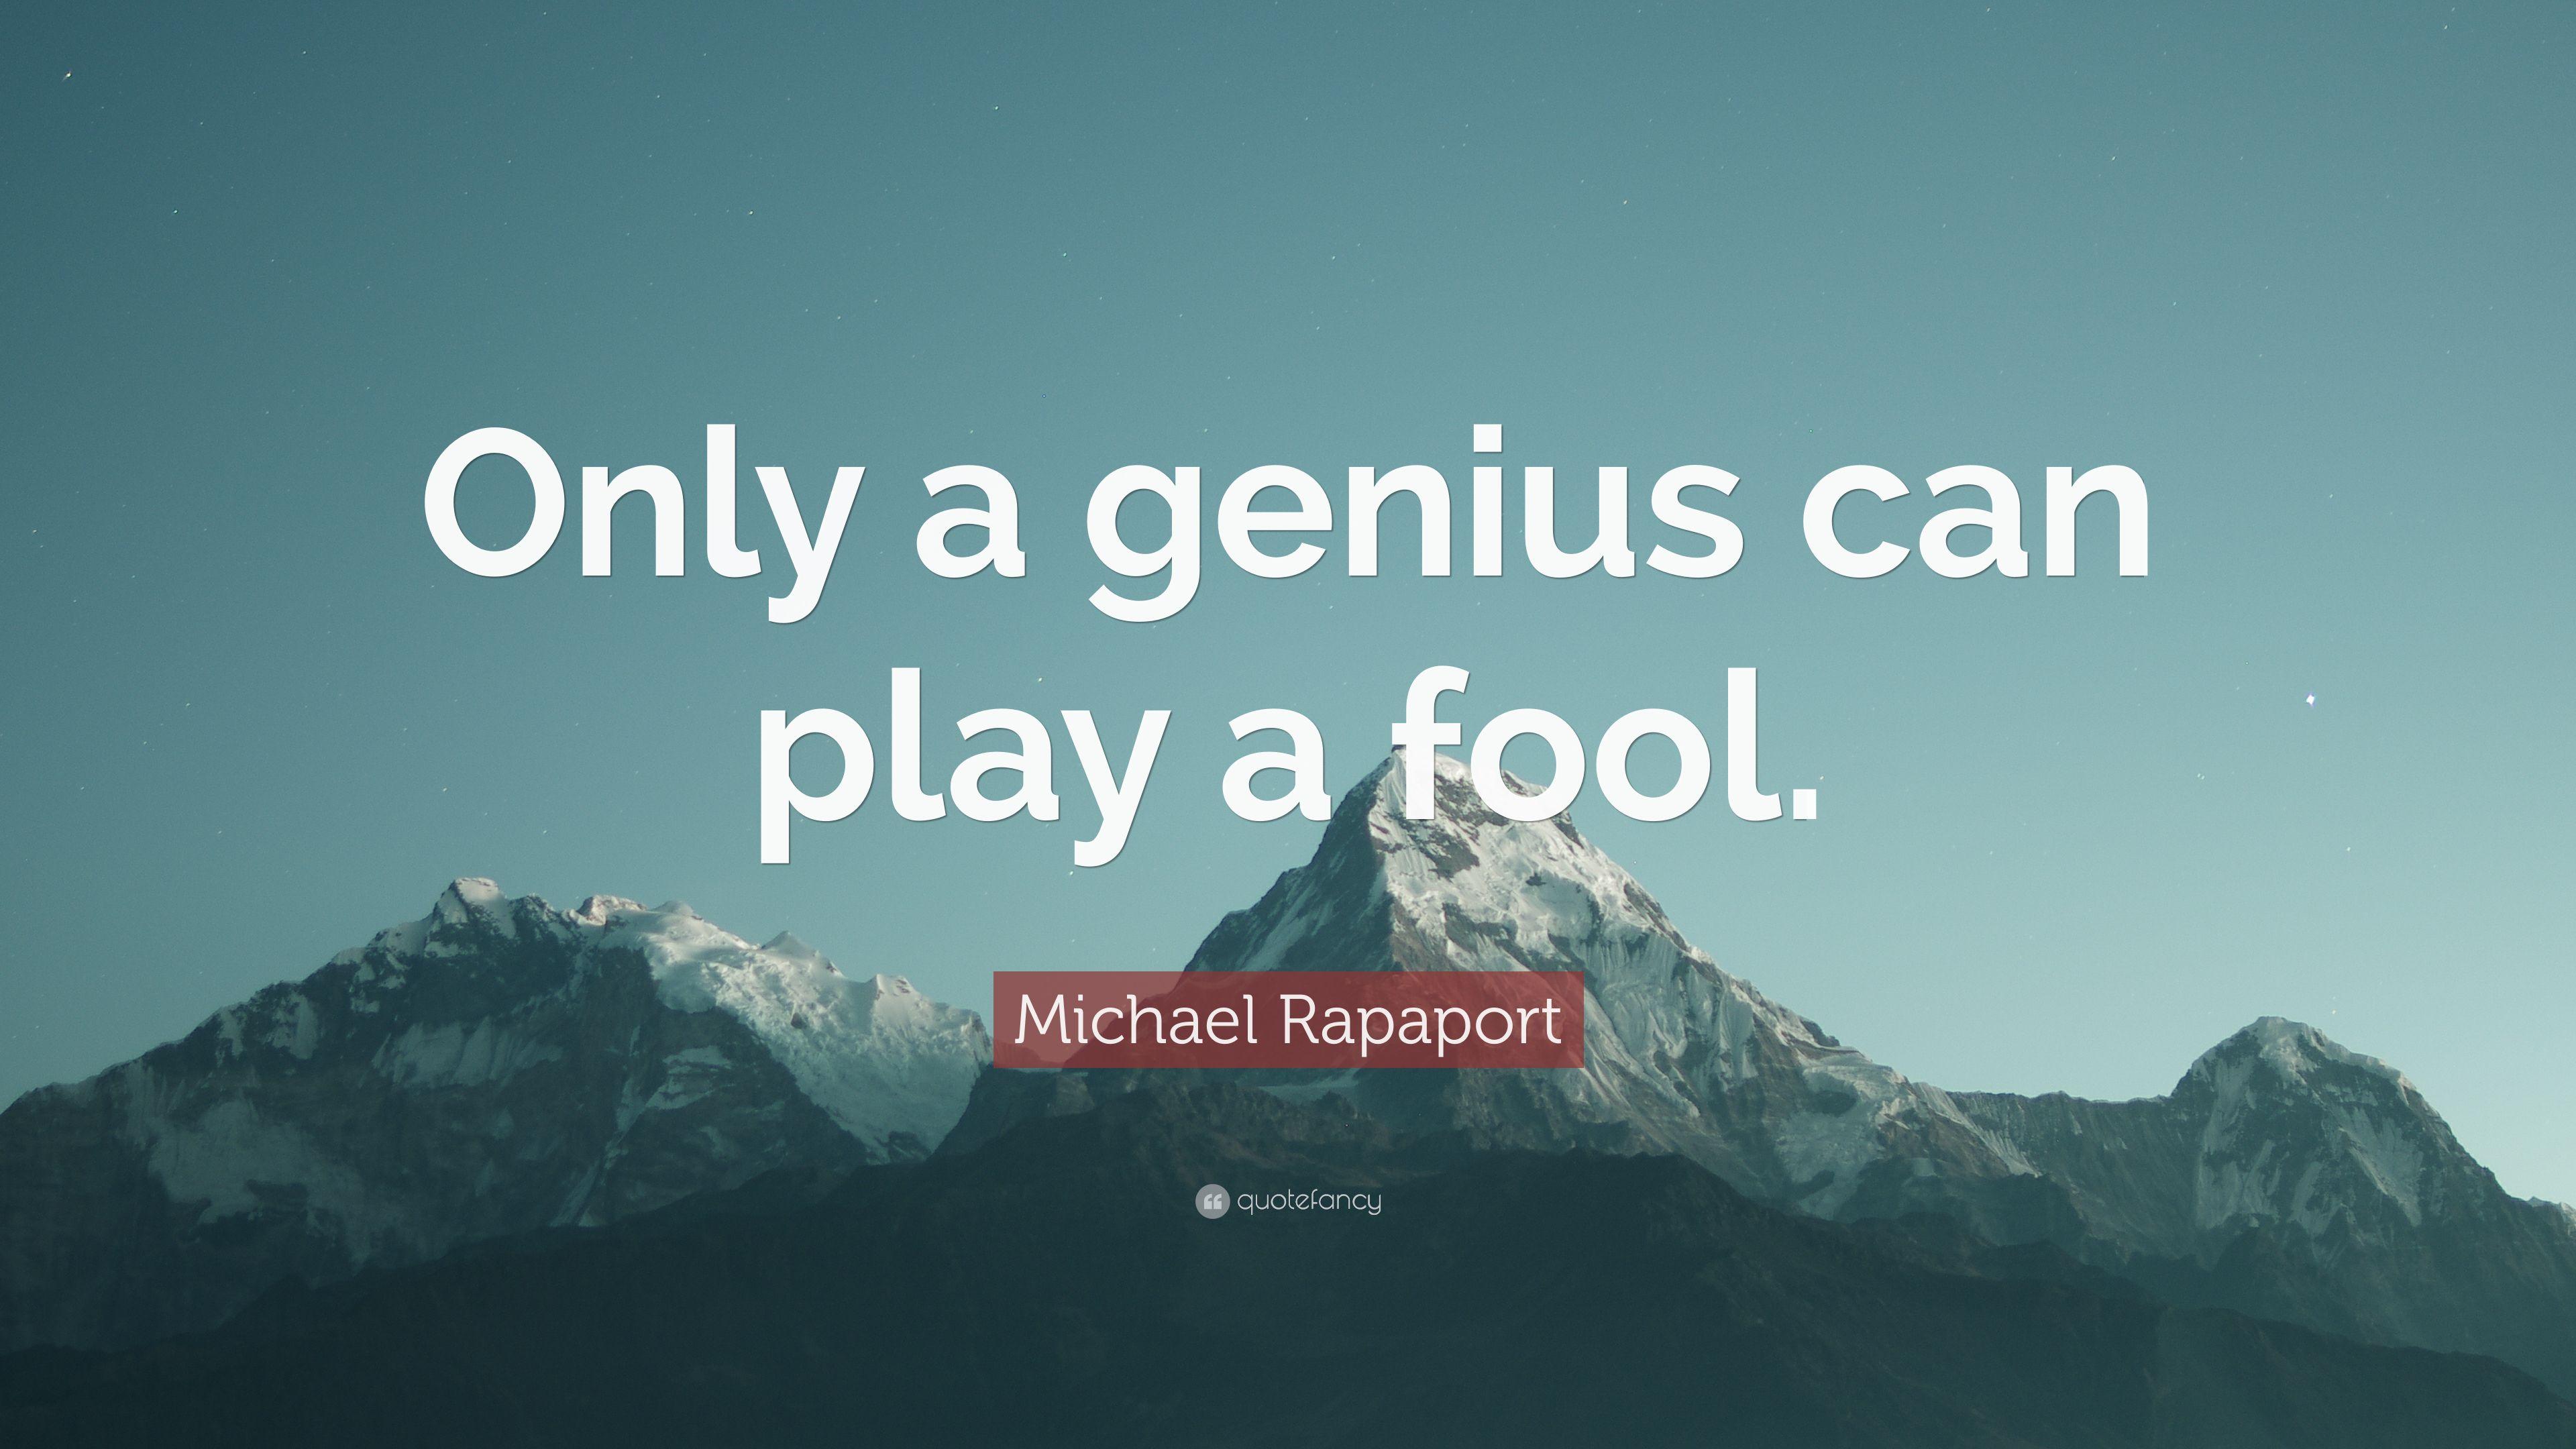 Michael Rapaport Quote: “Only a genius can play a fool.” 10